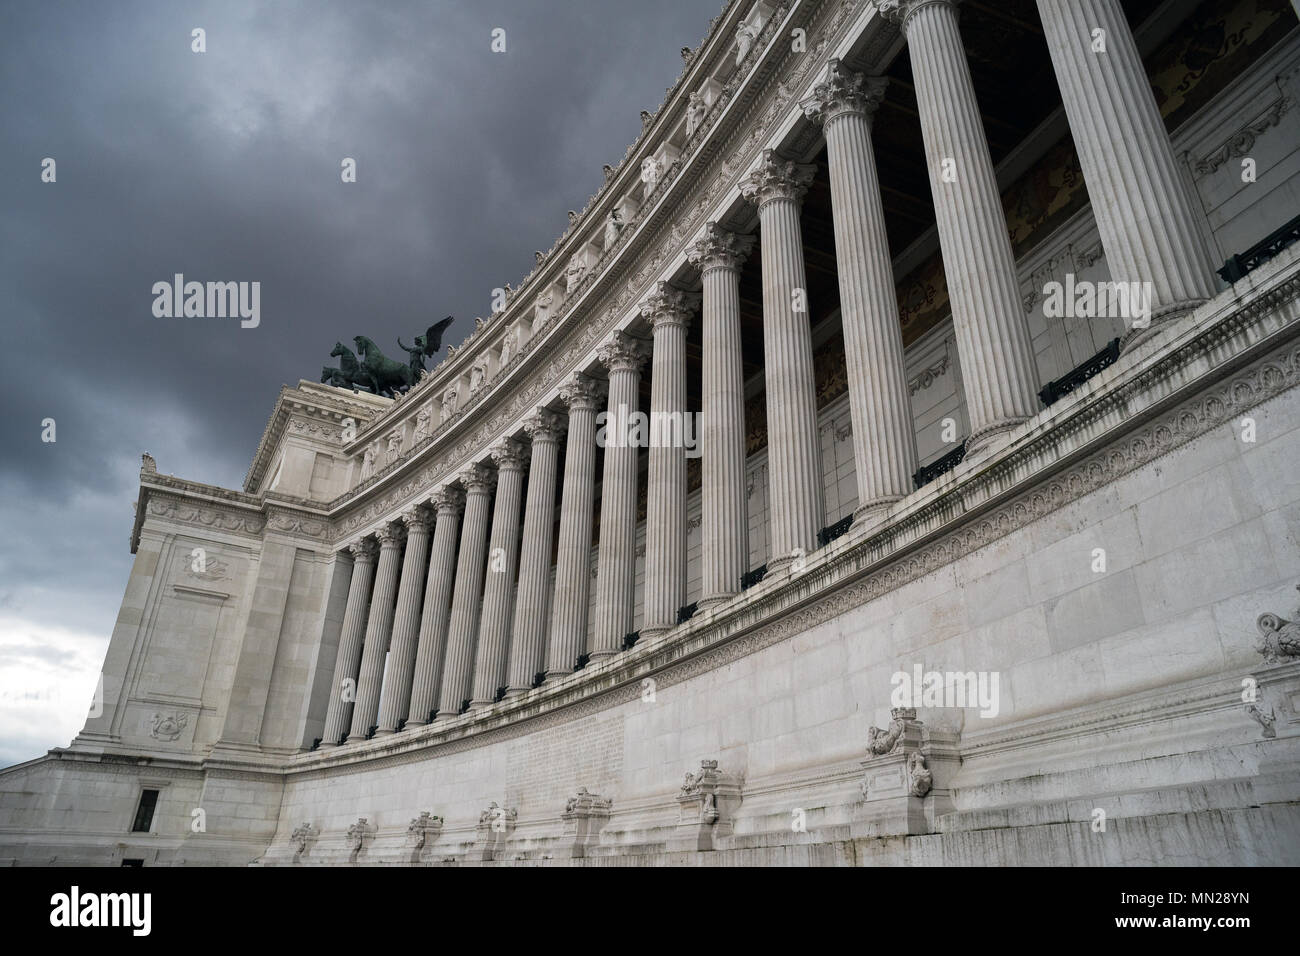 Rome,'The Victorian', Italy: The columns of the Altar of the Fatherland of Rome photographed before a storm Stock Photo